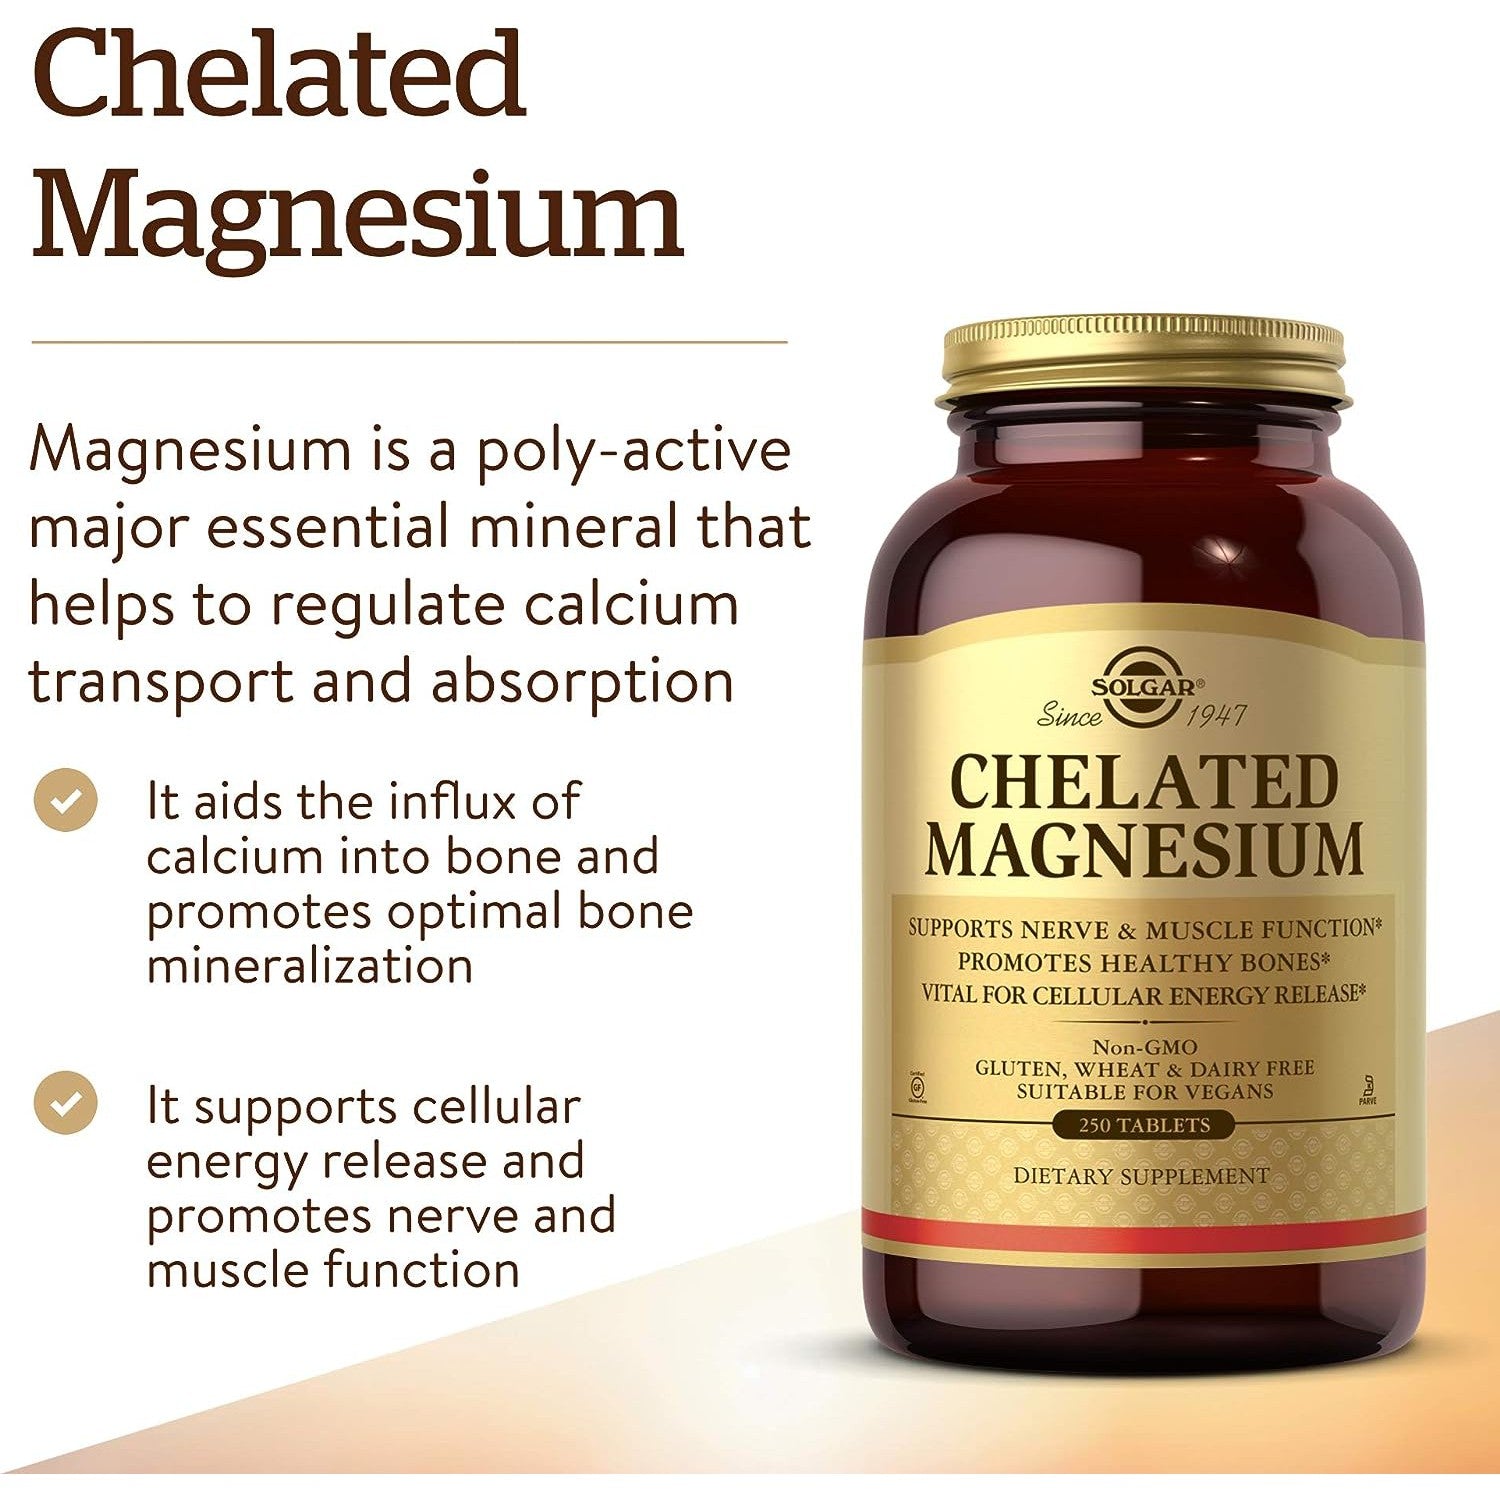 Solgar Chelated Magnesium 400mg as Magnesium Glycinate and Oxide 250 Tablets